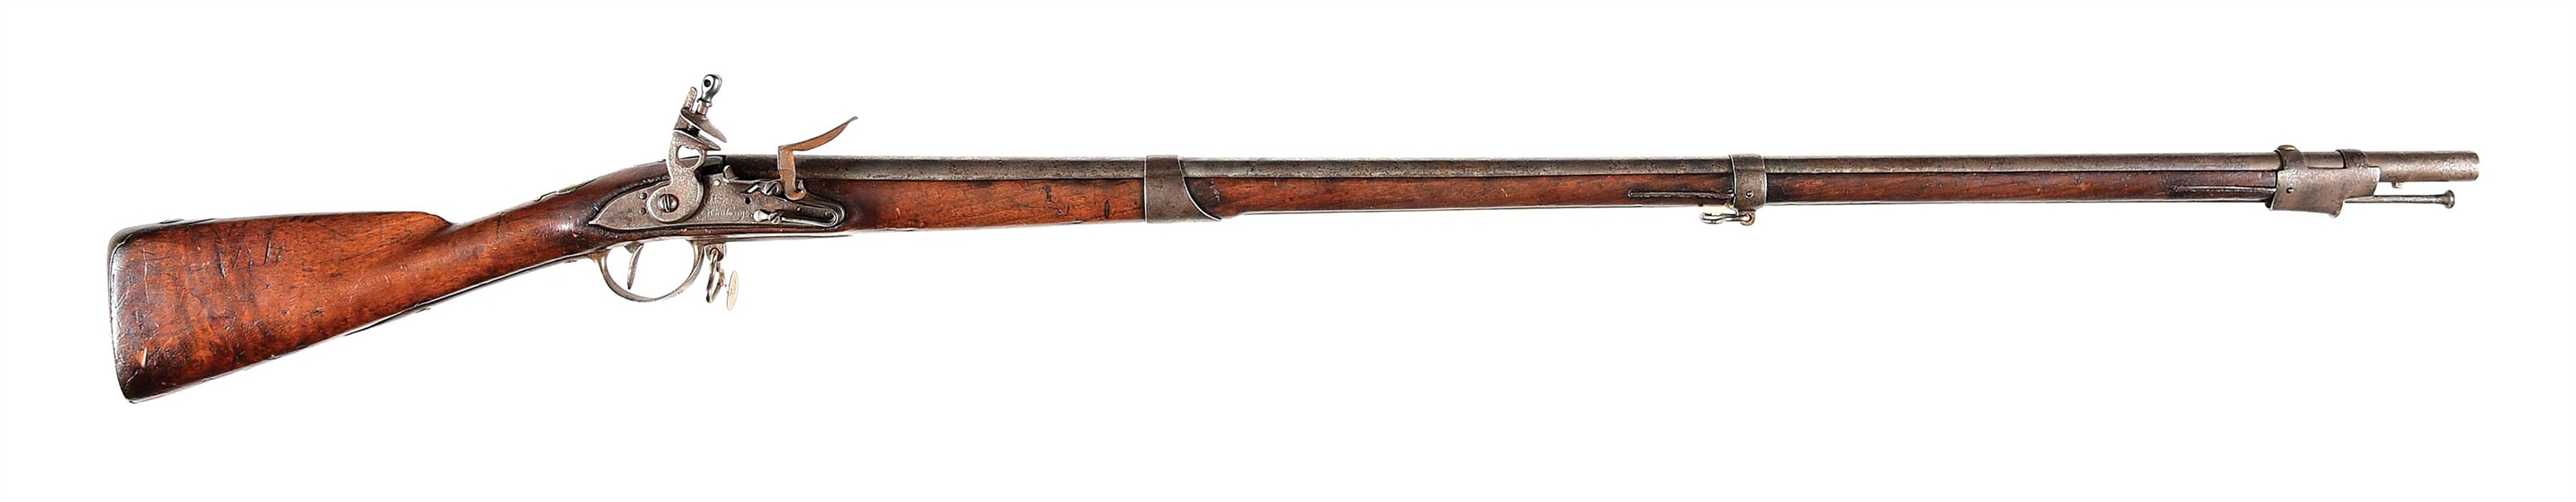 (A) A RARE FRENCH MODEL 1763 MUSKET MARKED TO THE 3RD NEW HAMPSHIRE BATTALION.